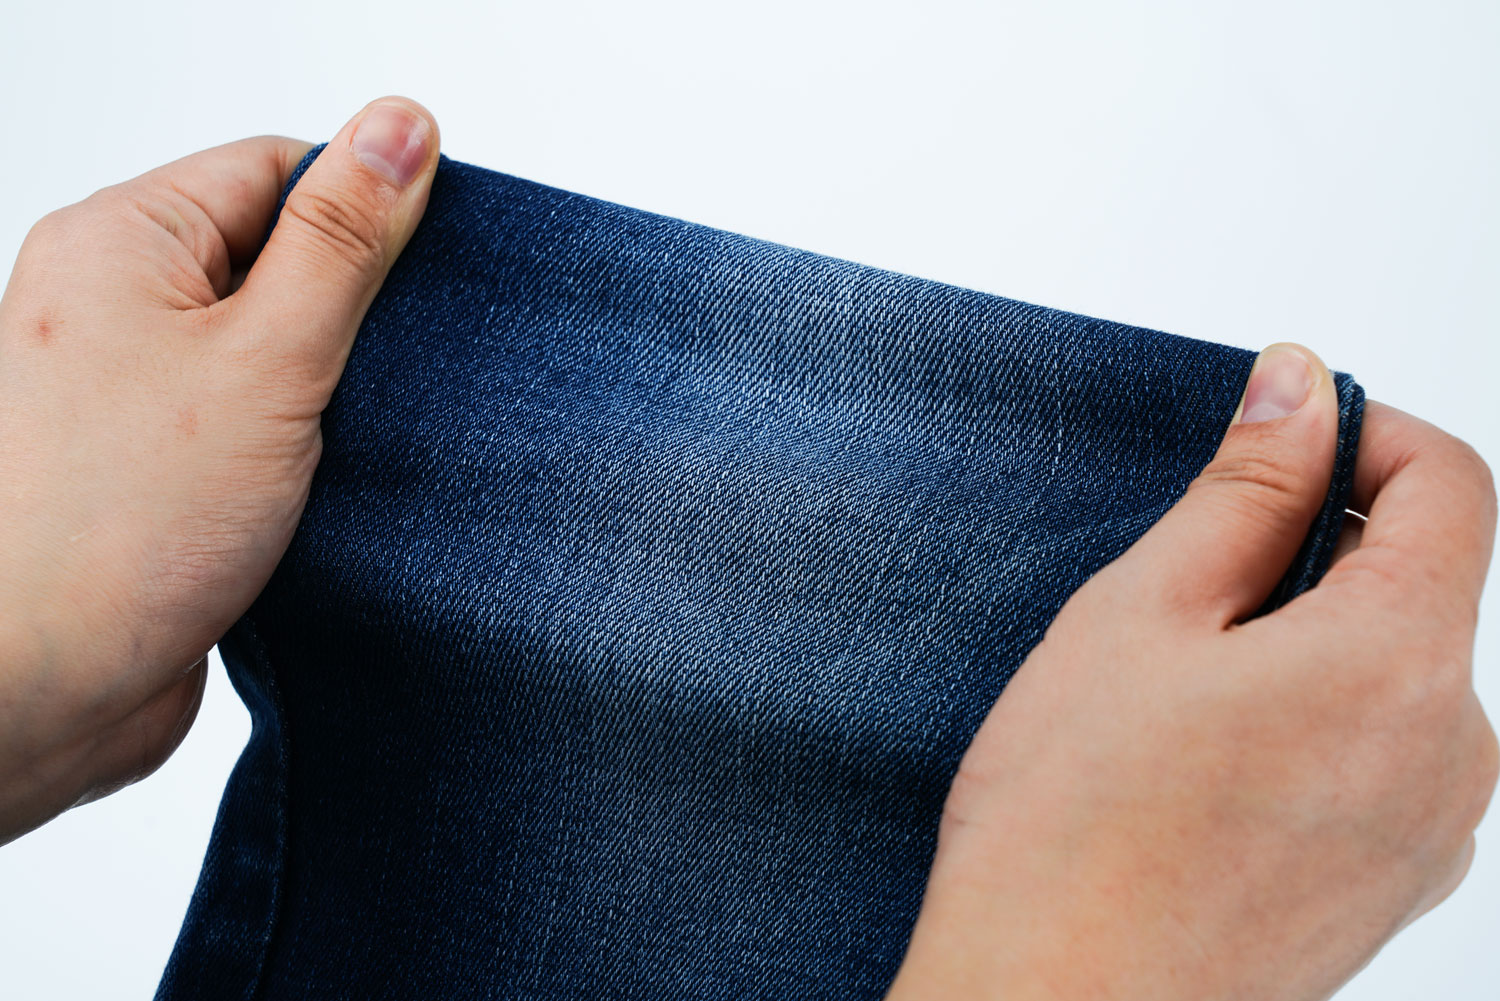 How to Find Best Stretchable Denim Fabric Products 2